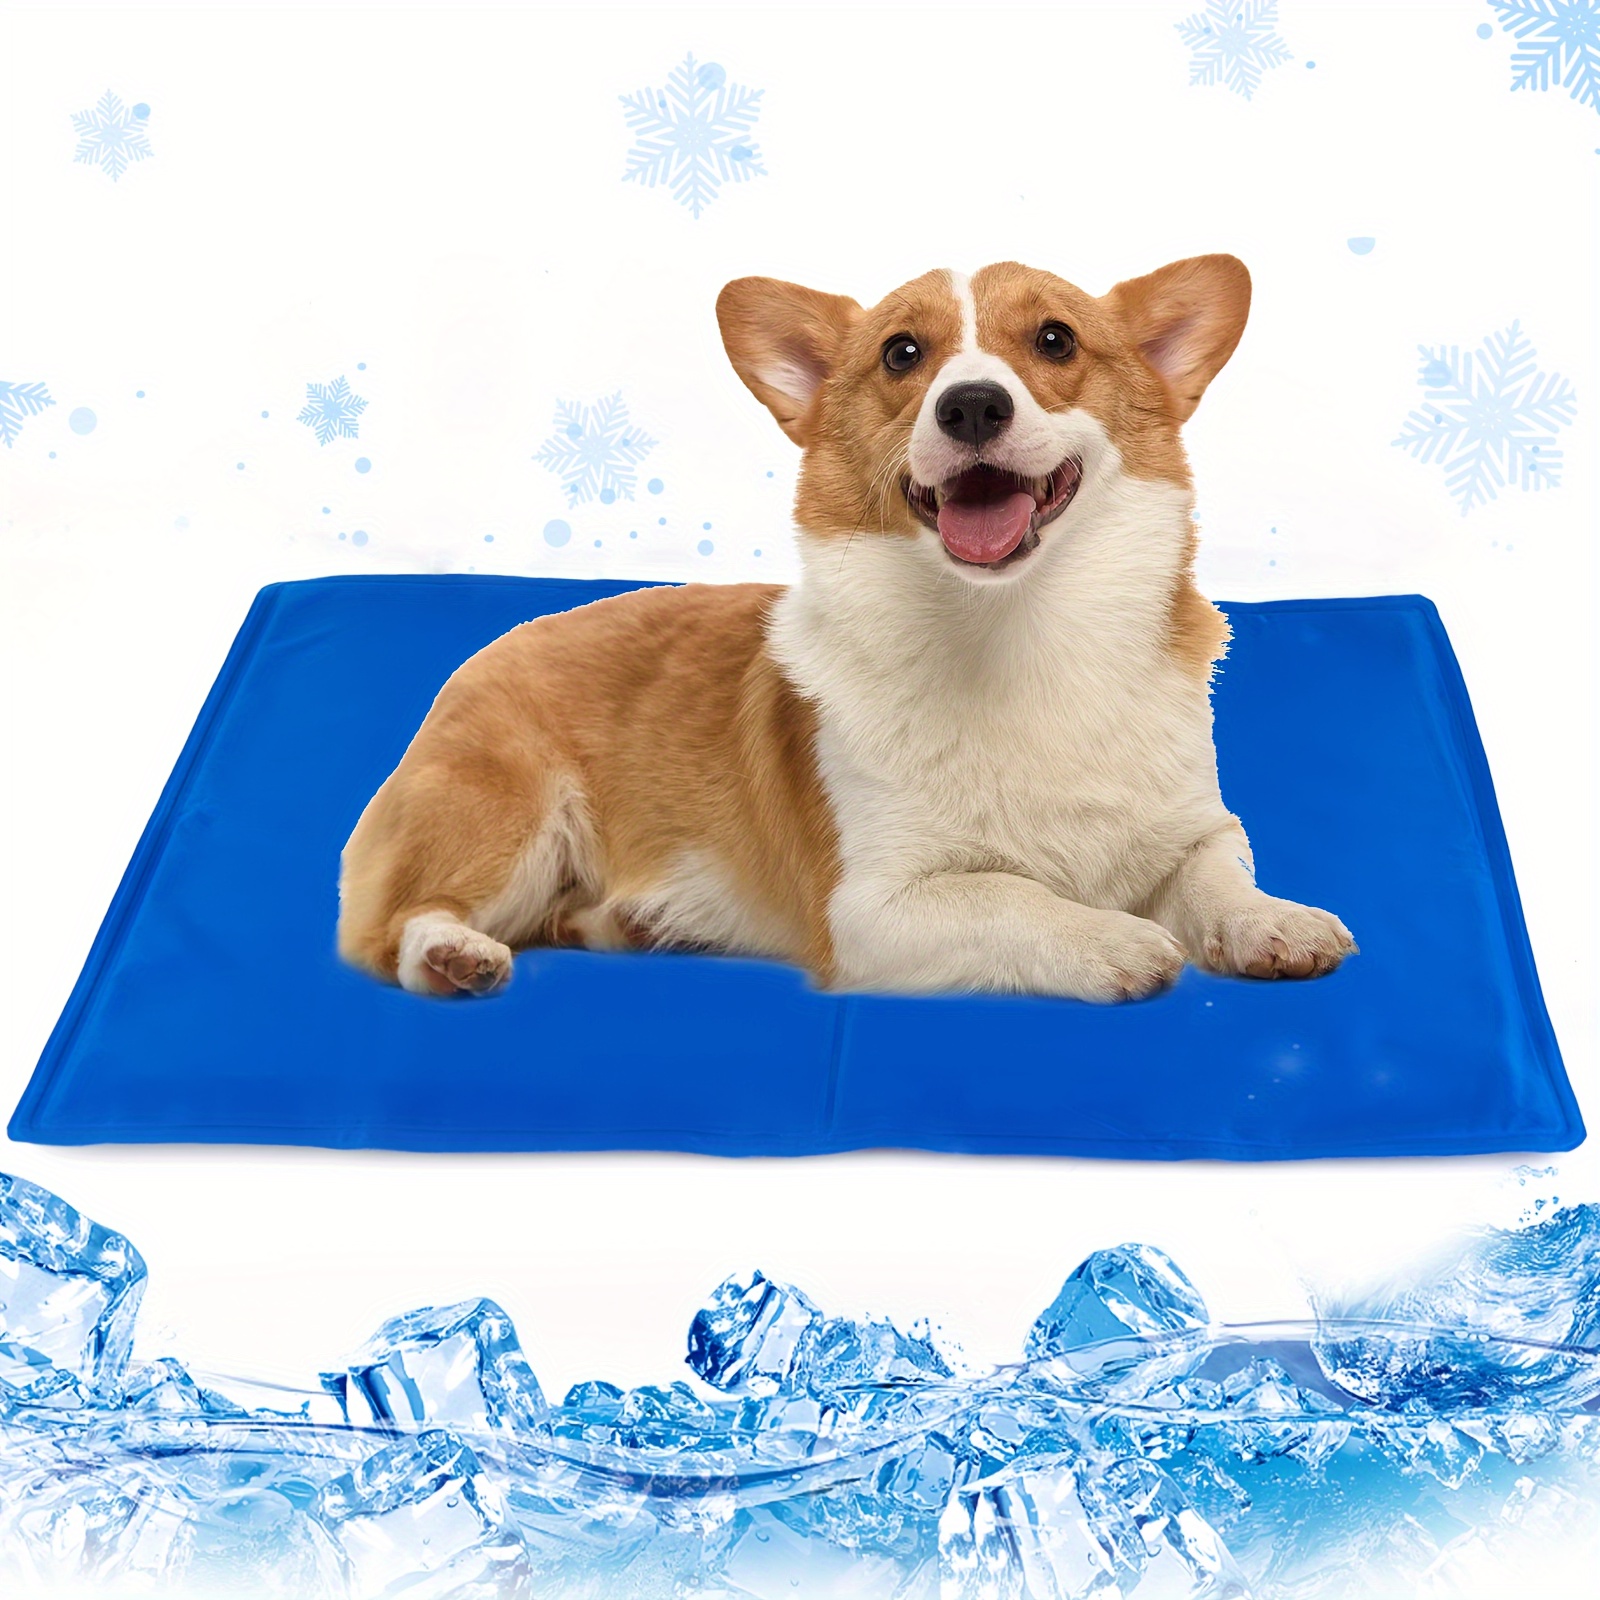 

Dog Cooling Pad, Pet Cooling Pad For Dogs And Cats, Pressure Activated Dog Cooling Pad, No Water Or Refrigeration Required, Non-toxic Gel